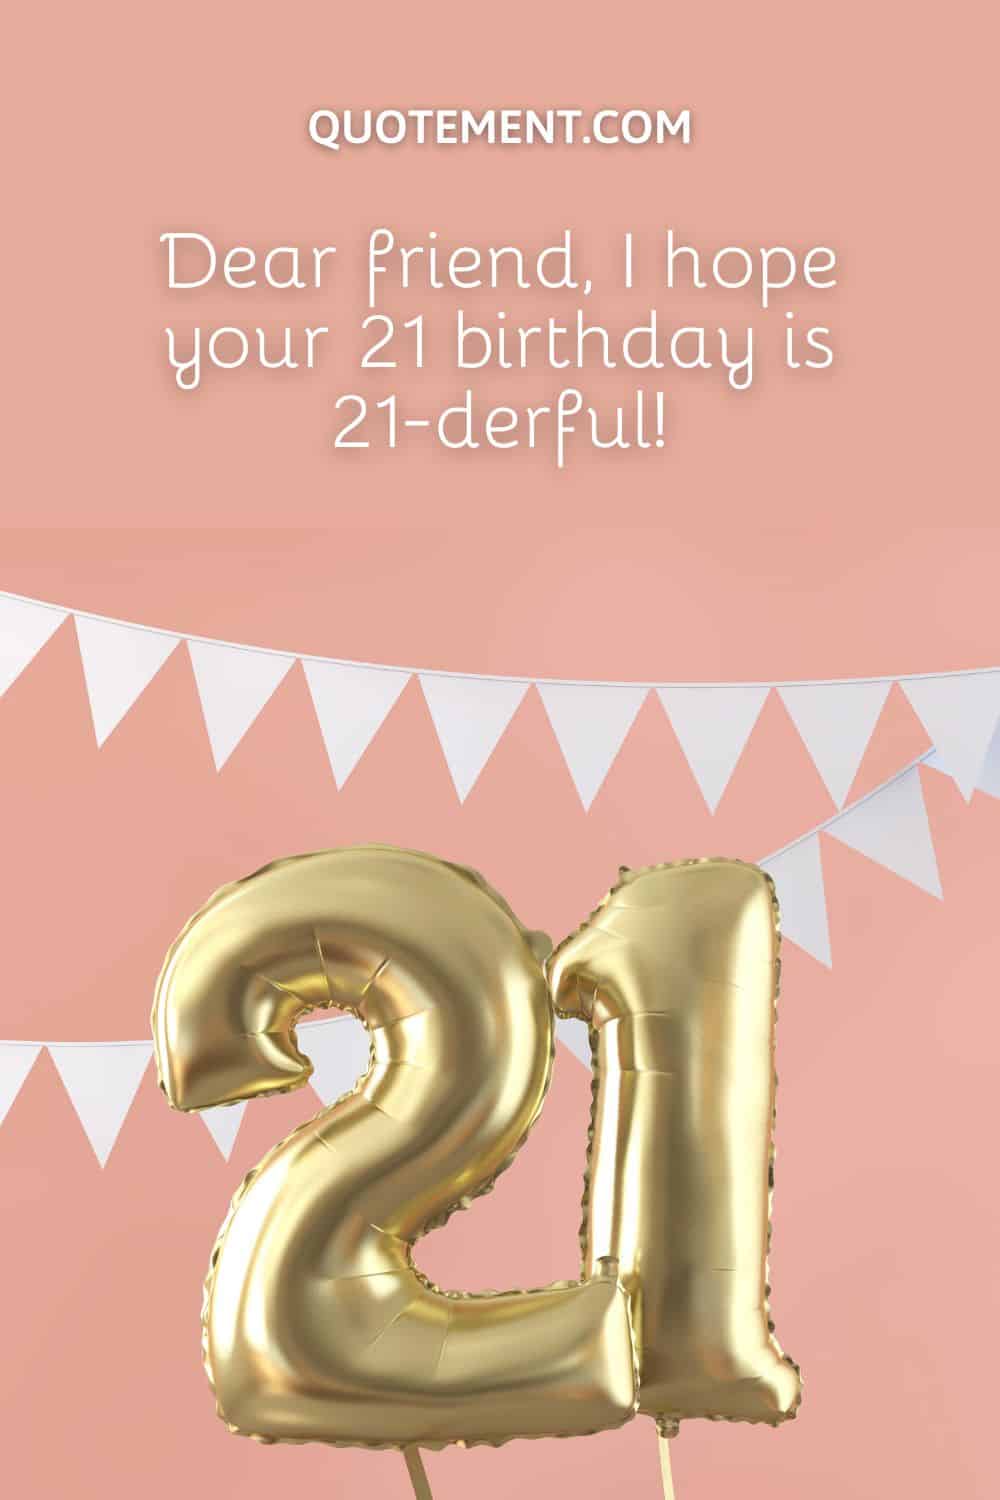 I hope your 21 birthday is 21-derful